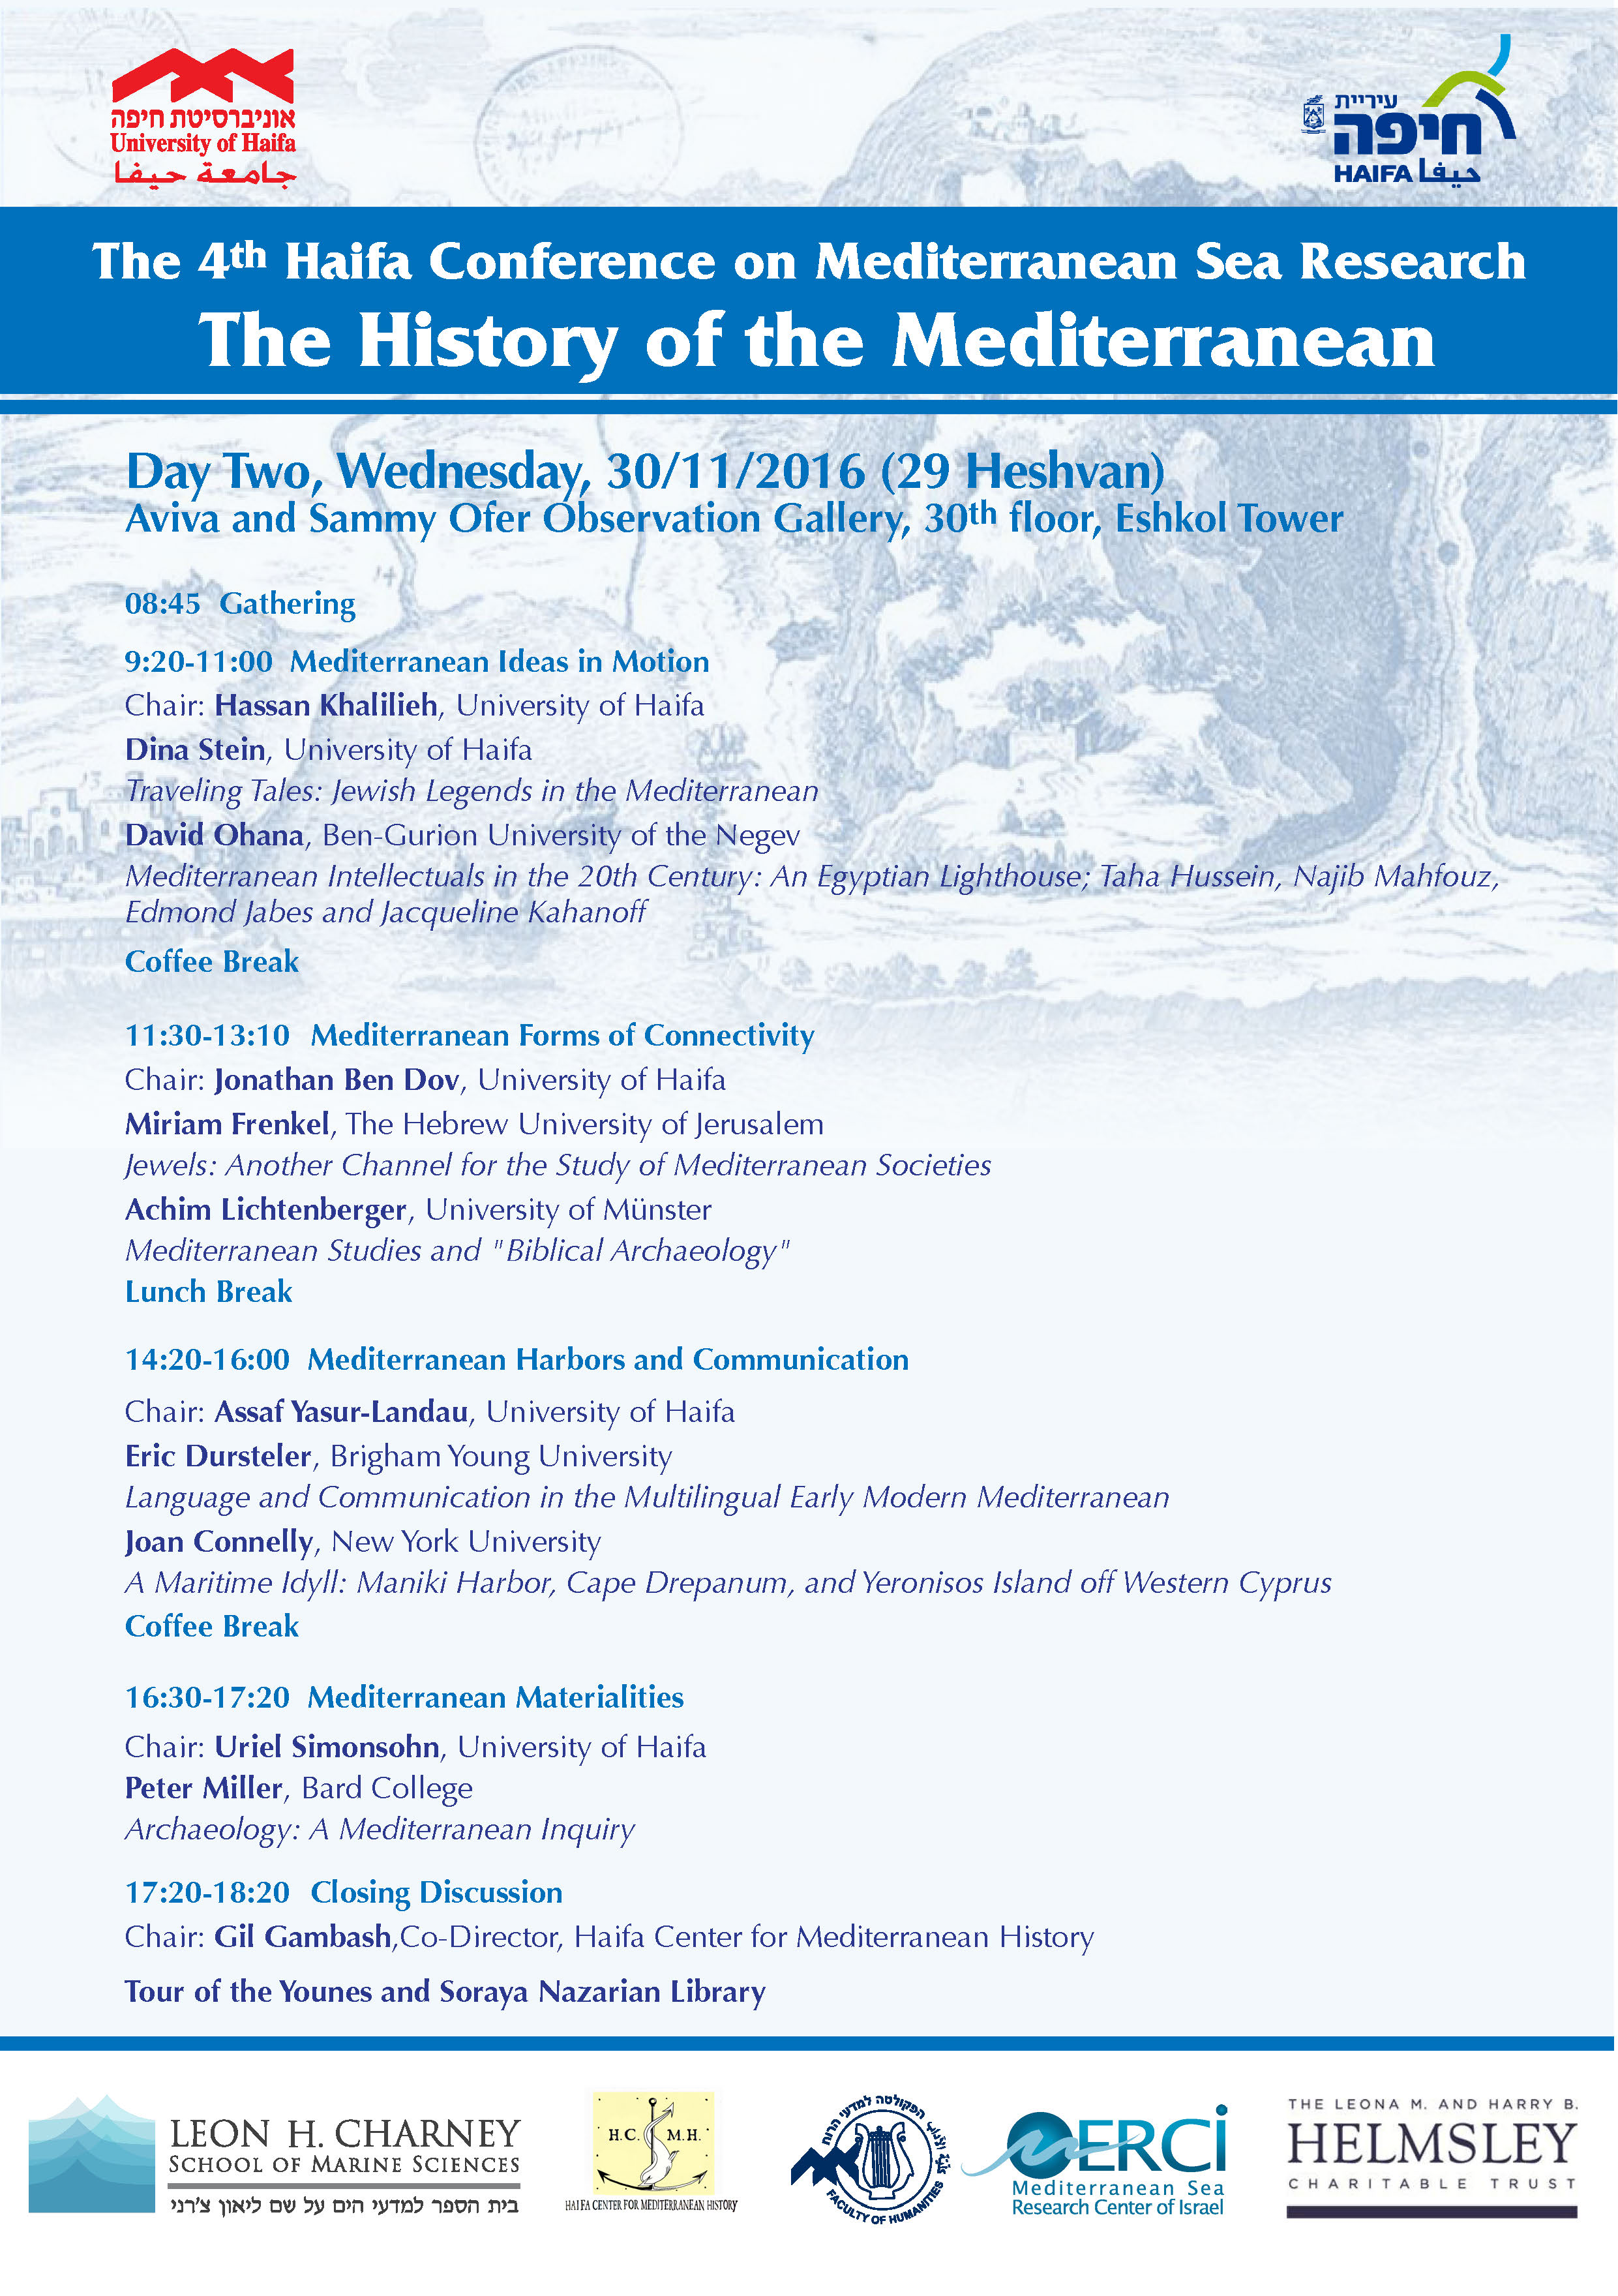 The Haifa Conference on Mediterranean Research program Page 2